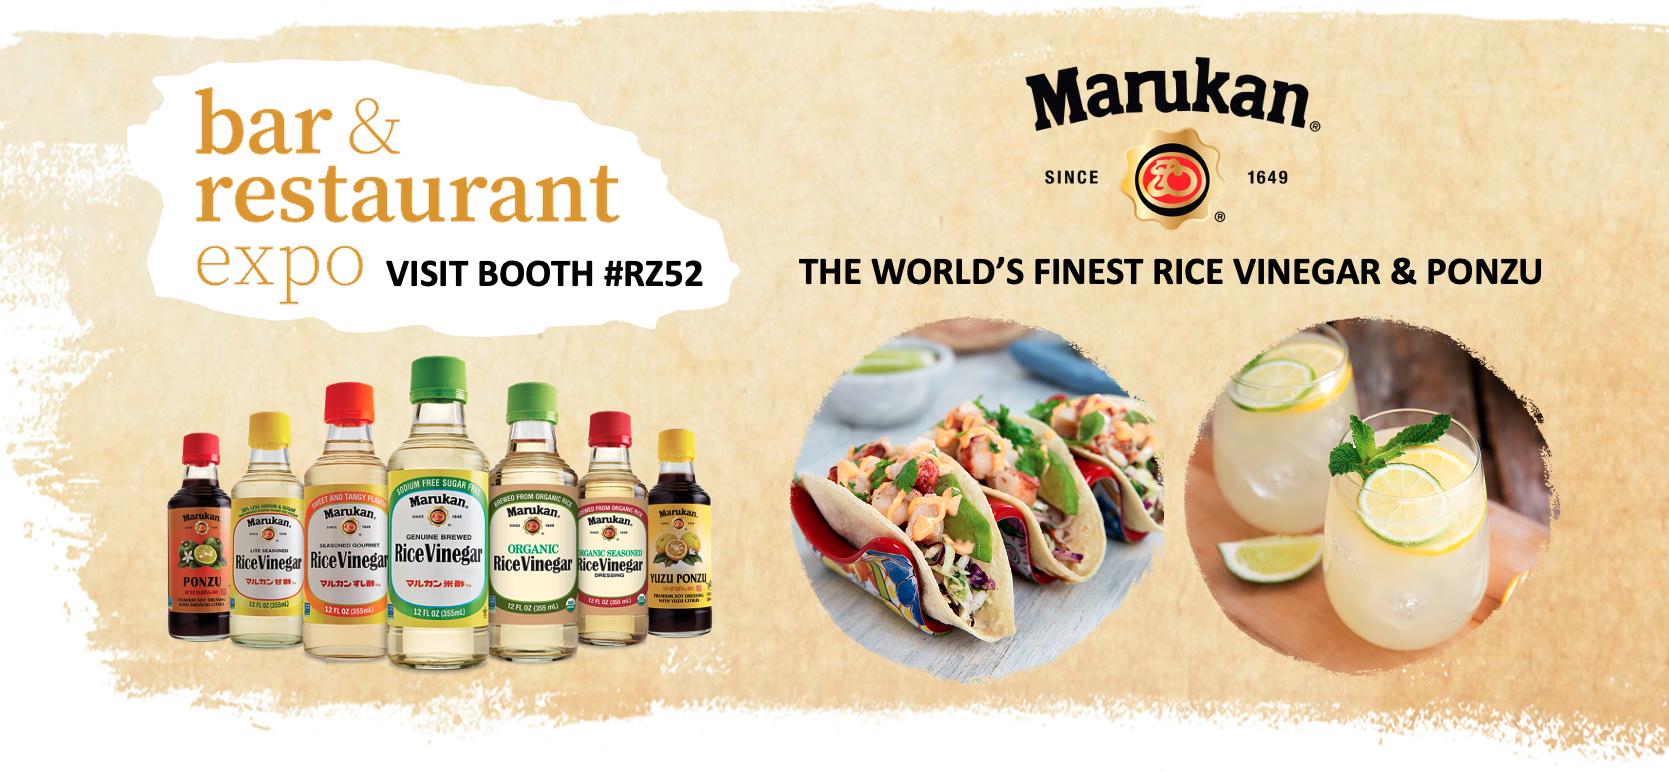 Marukan is Serving Up Tasty Drinks & Samples at the Bar & Restaurant Expo